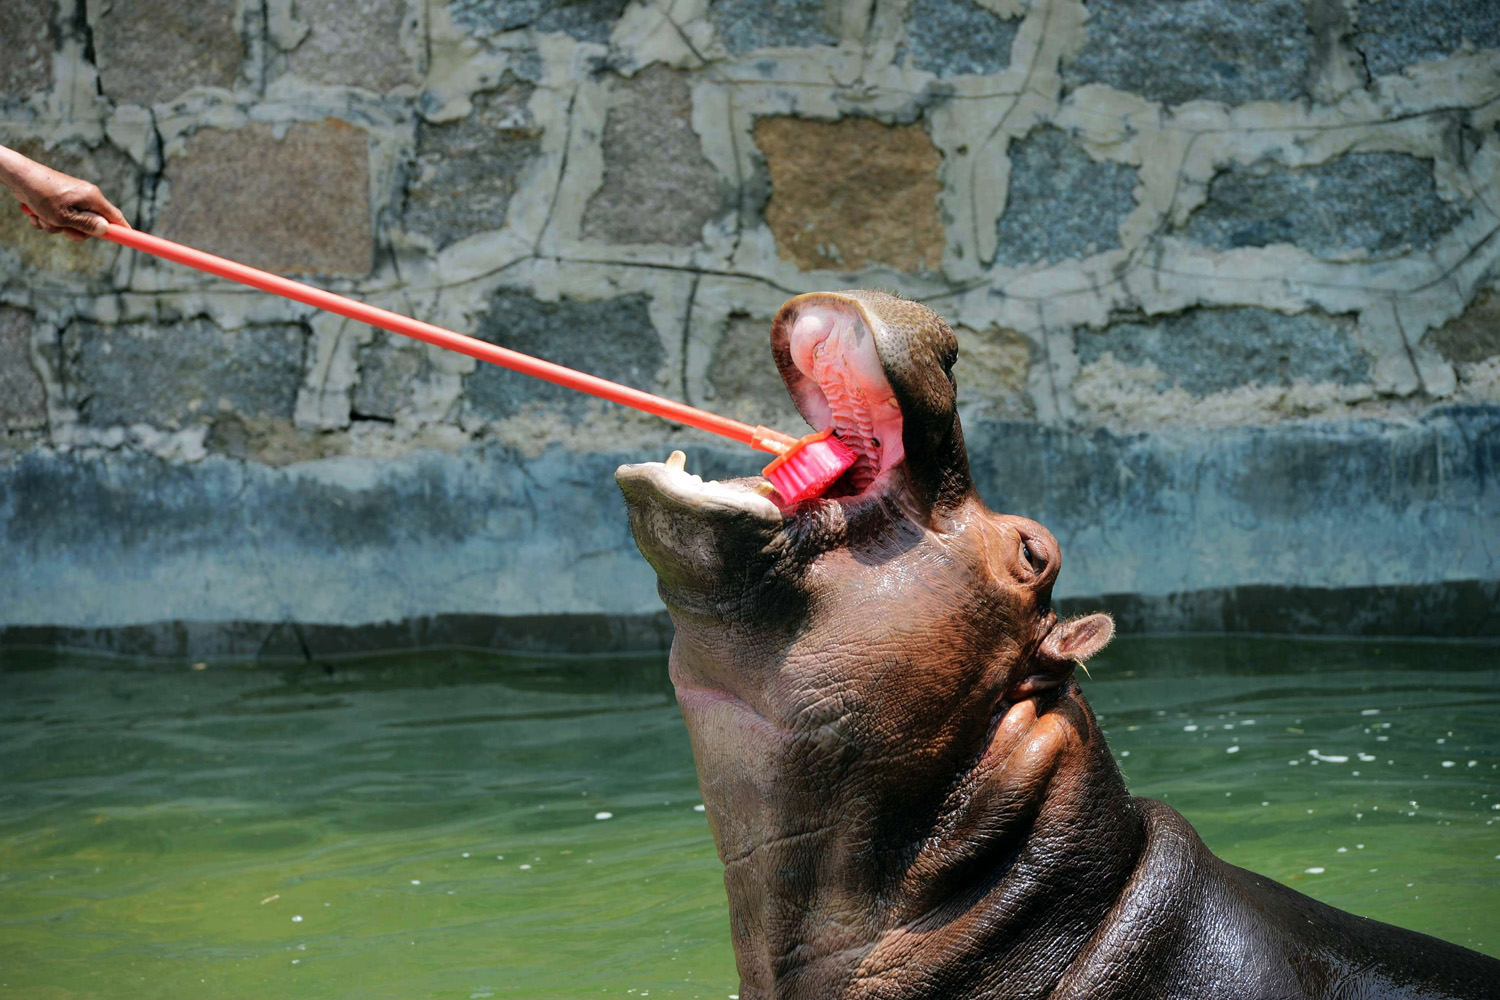 A hippopotamus has its teeth cleaned by a keeper in its enclosure in Qingdao Wildlife World in Qingdao, east China's Shandong province on May 22, 2014.